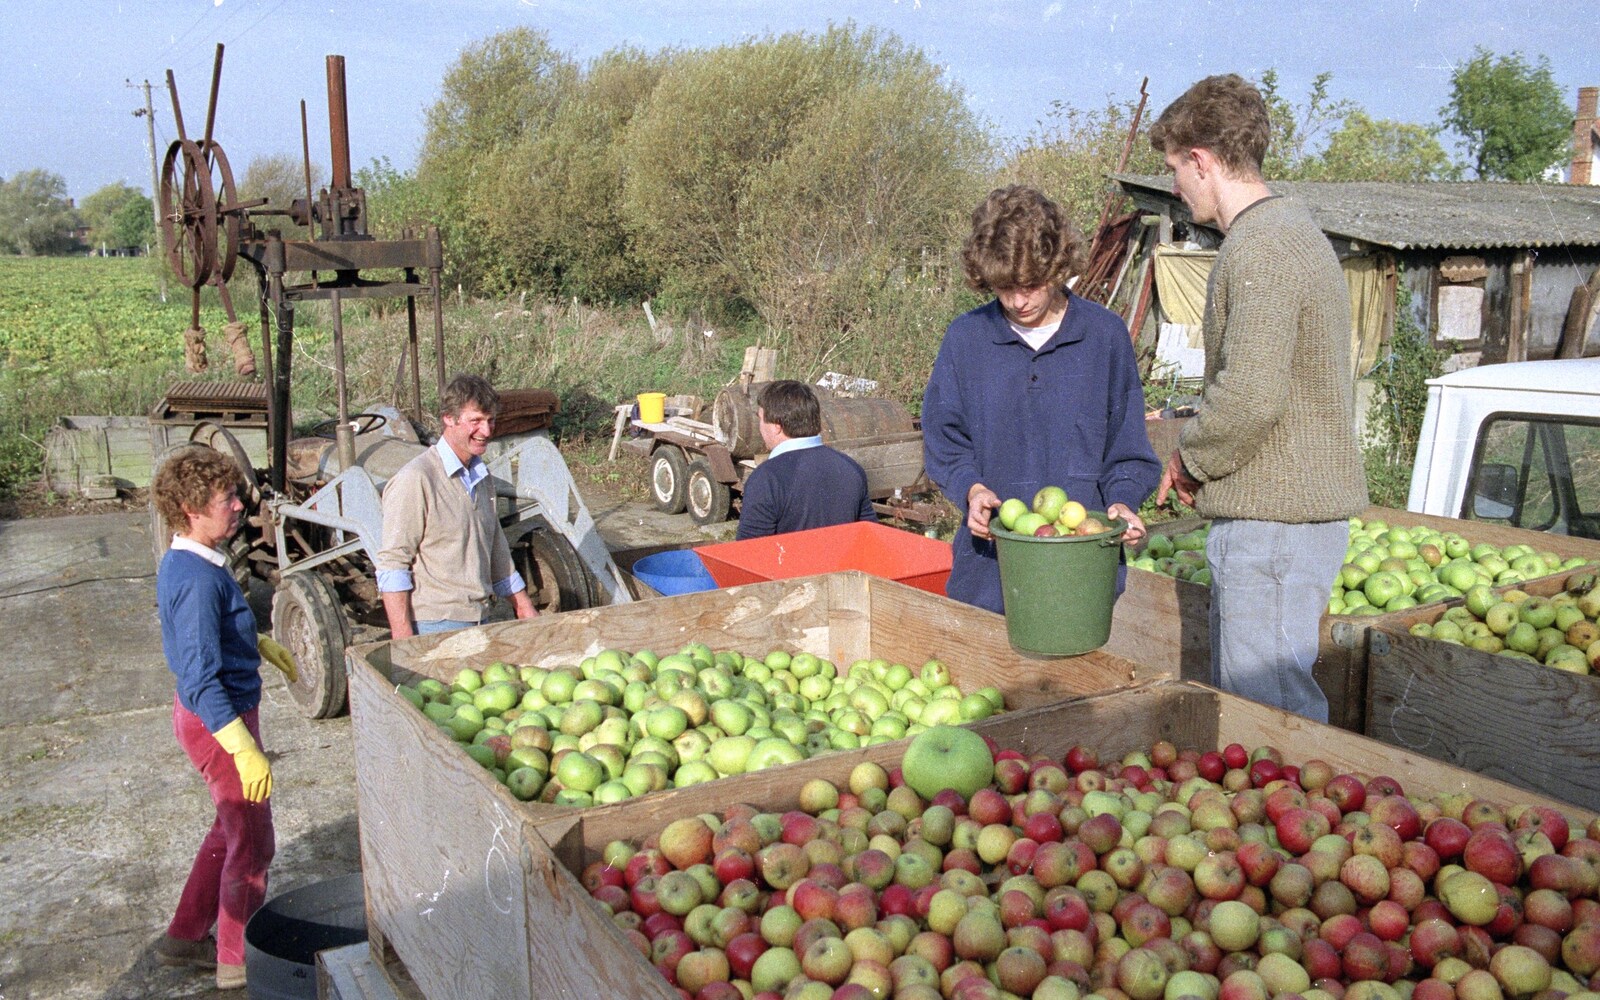 The chopping of the apples commences from The Annual Cider Making Event, Stuston, Suffolk - 11th October 1990